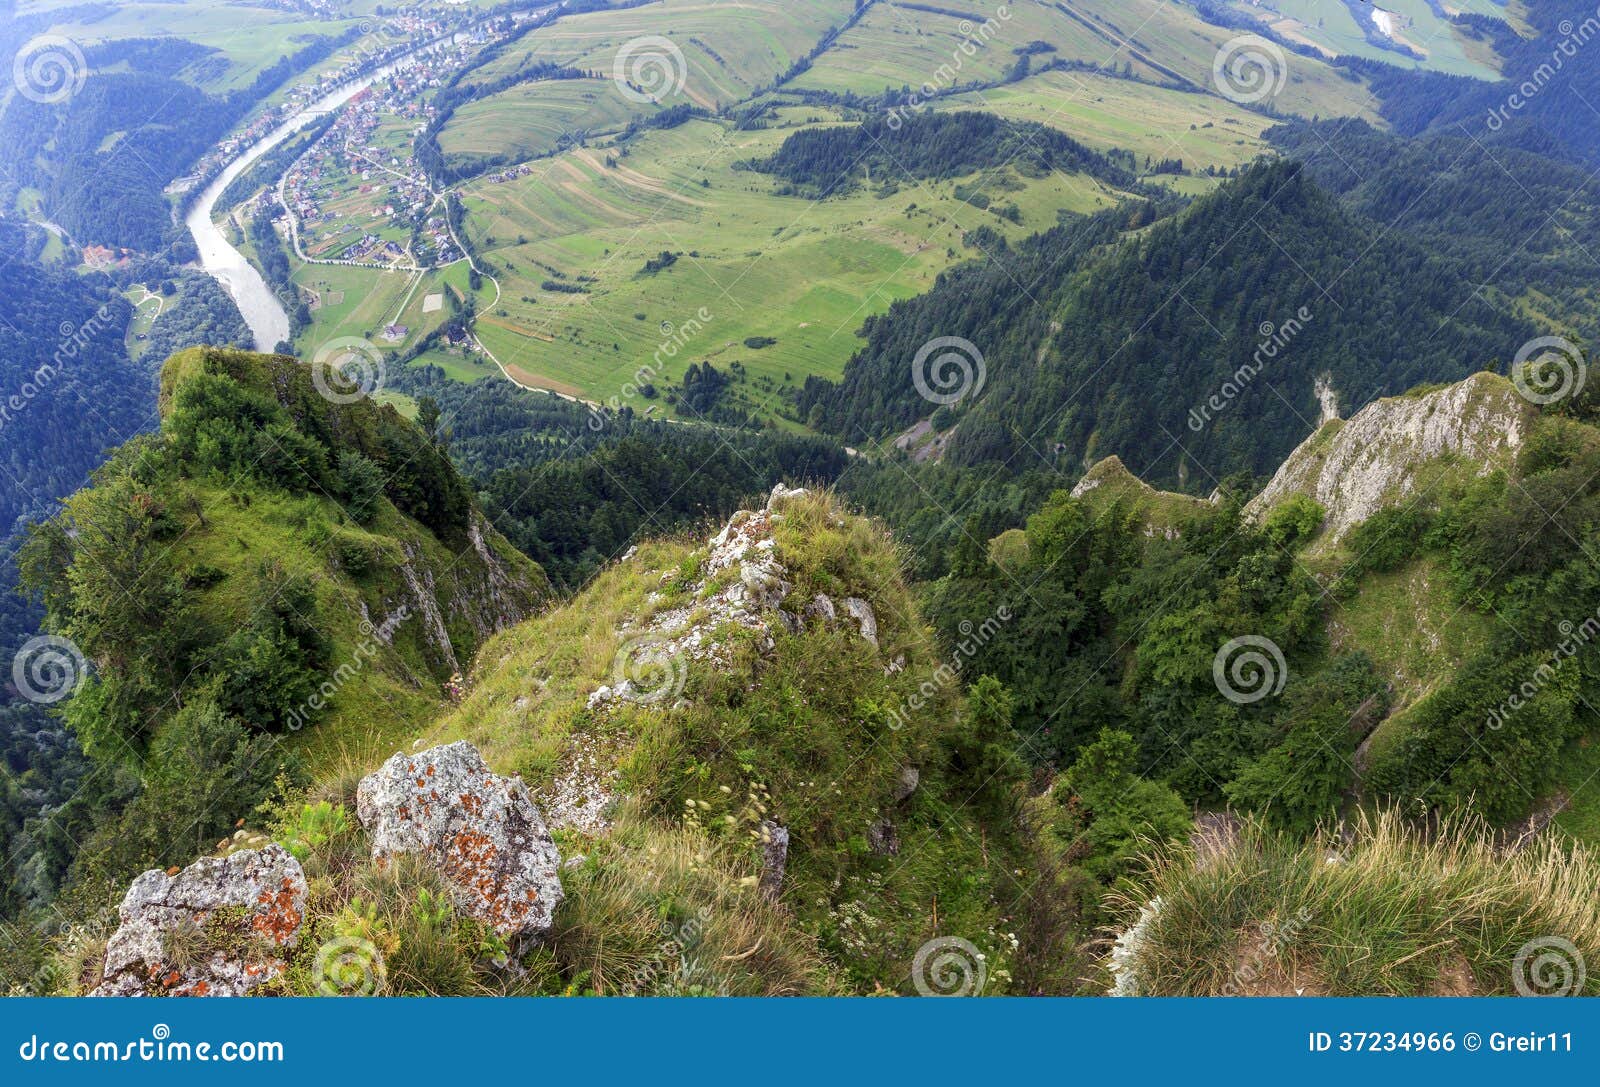 breathtaking view from three crown mountain, pieniny